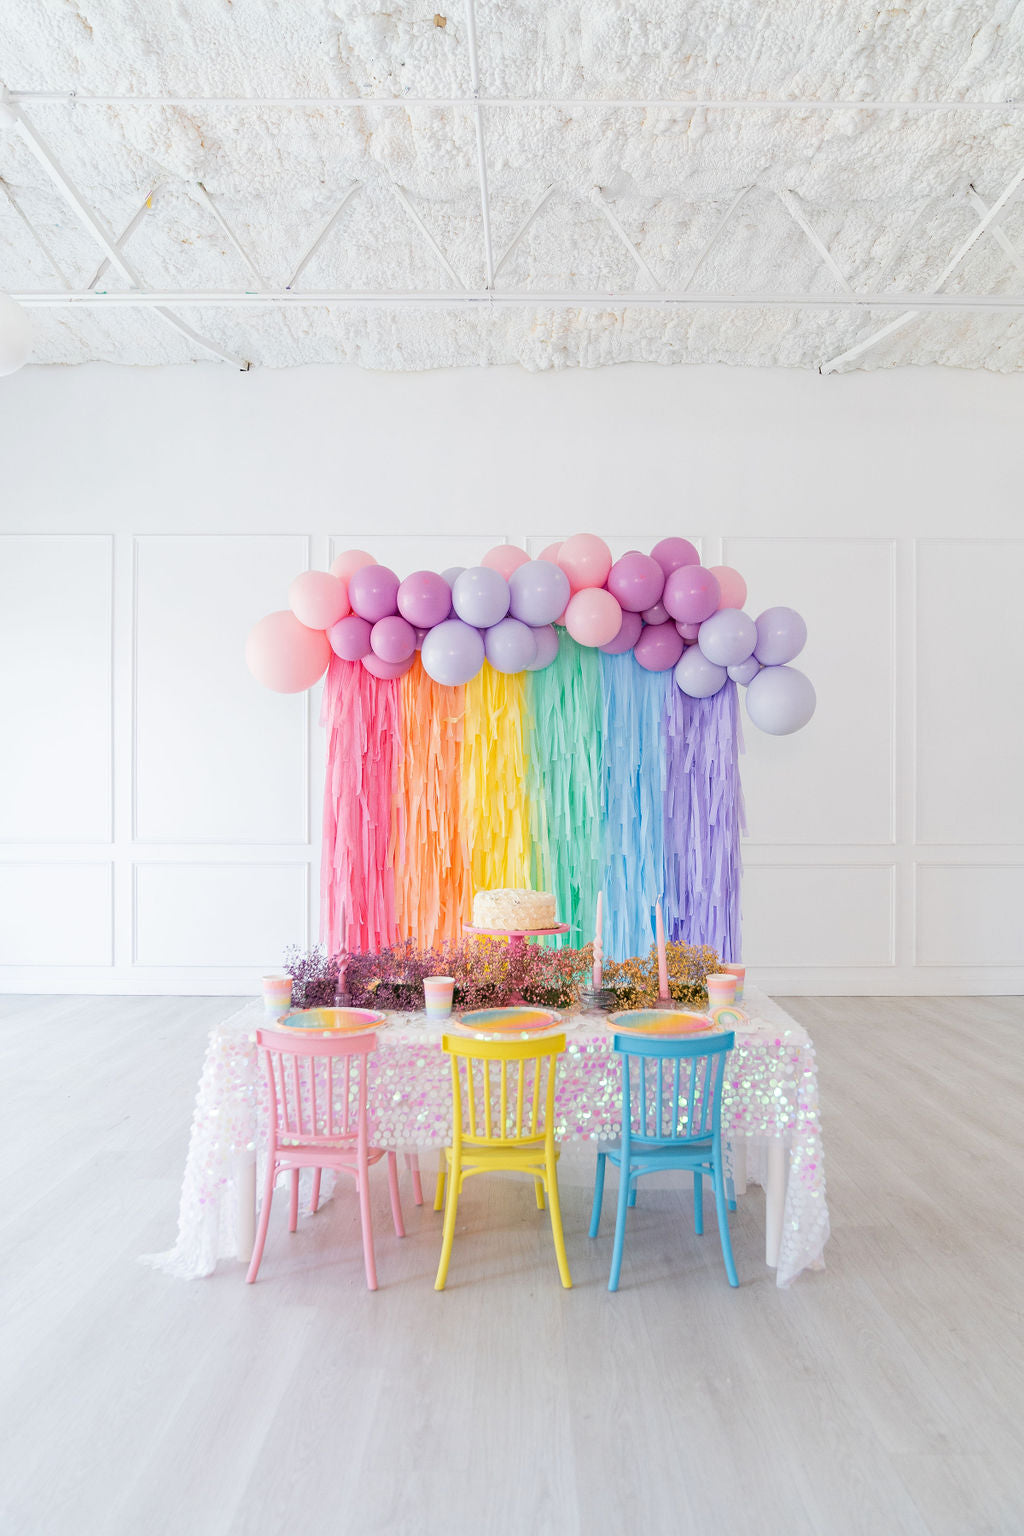 Pretty Pastel Rainbow Backdrop – Oh My Darling Party Co